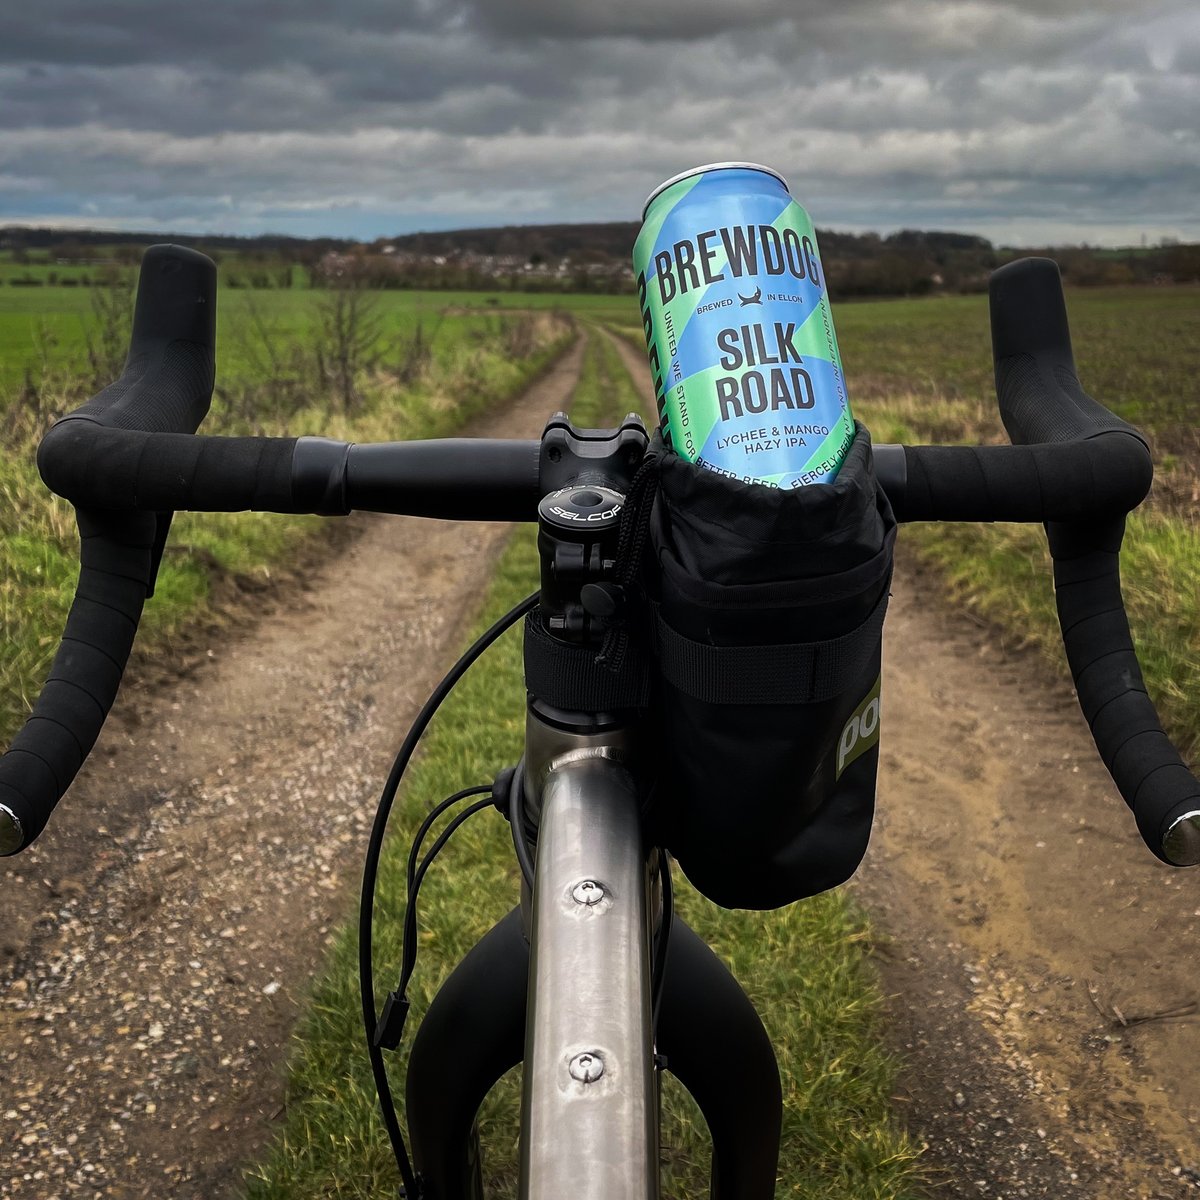 The Titus Silk Road and the @BrewDog Silk Road...the perfect beer for the perfect titanium adventure bike (Warning: our Silk Road is made from Titanium - not Gold!) #PlanetXBikes #Brewdogbeer #TitaniumBikes #AdventureBikes